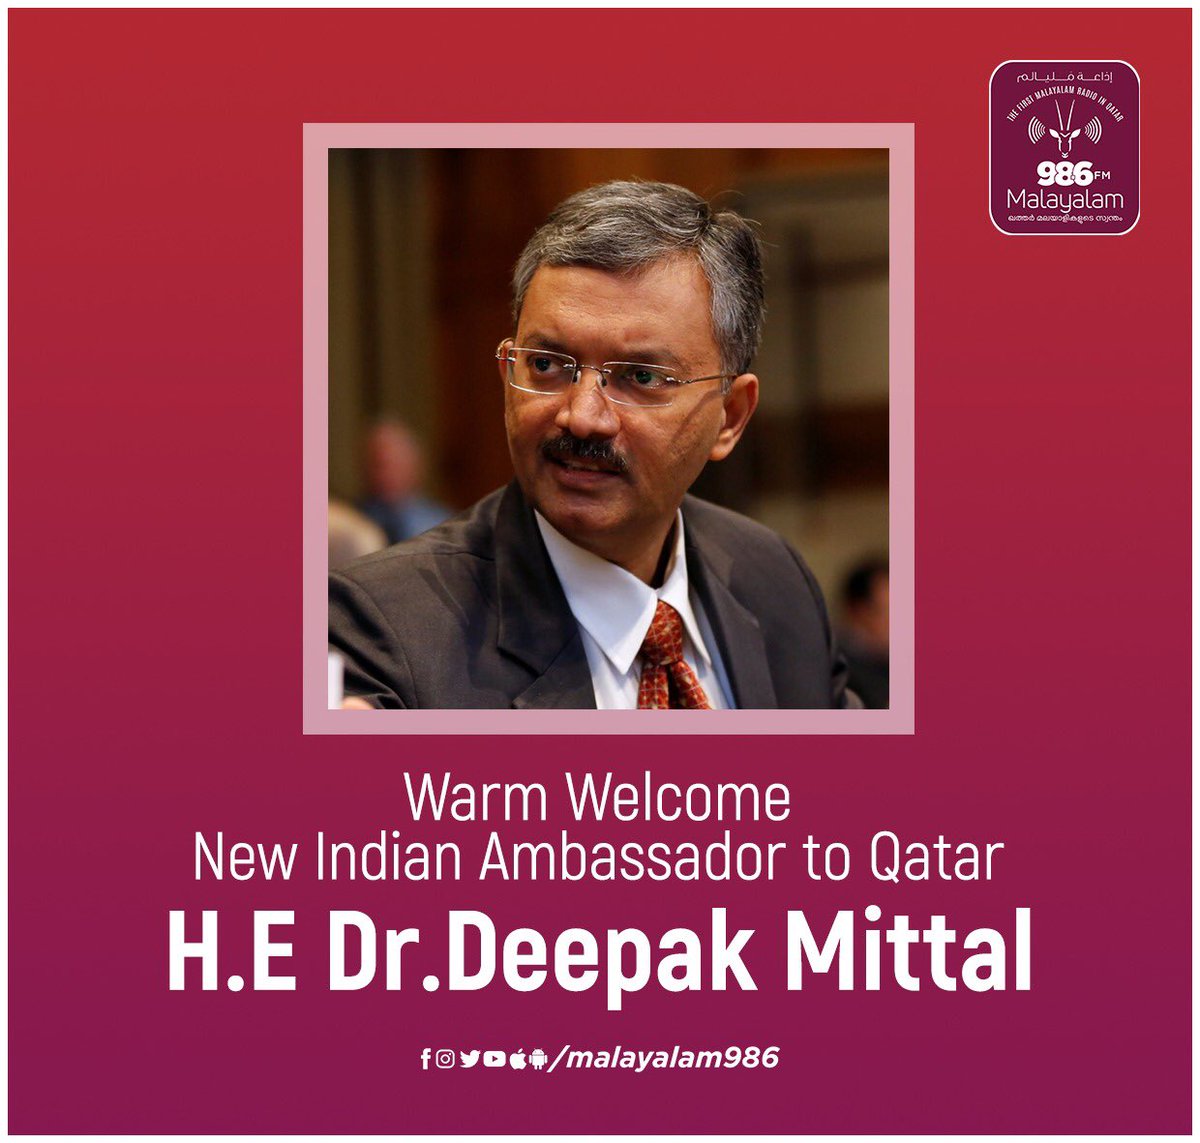 Qatar Welcomes New Indian Ambassador!!!

The IFS Officer & the Joint secretary of Ministry of External Affairs..
Shri Dr.Deepak Mittal 👏👏👏

Wishing all success in strengthening the bilateral relationships & enhancing the profile of the Indian community in Qatar!!

@d_mittal73